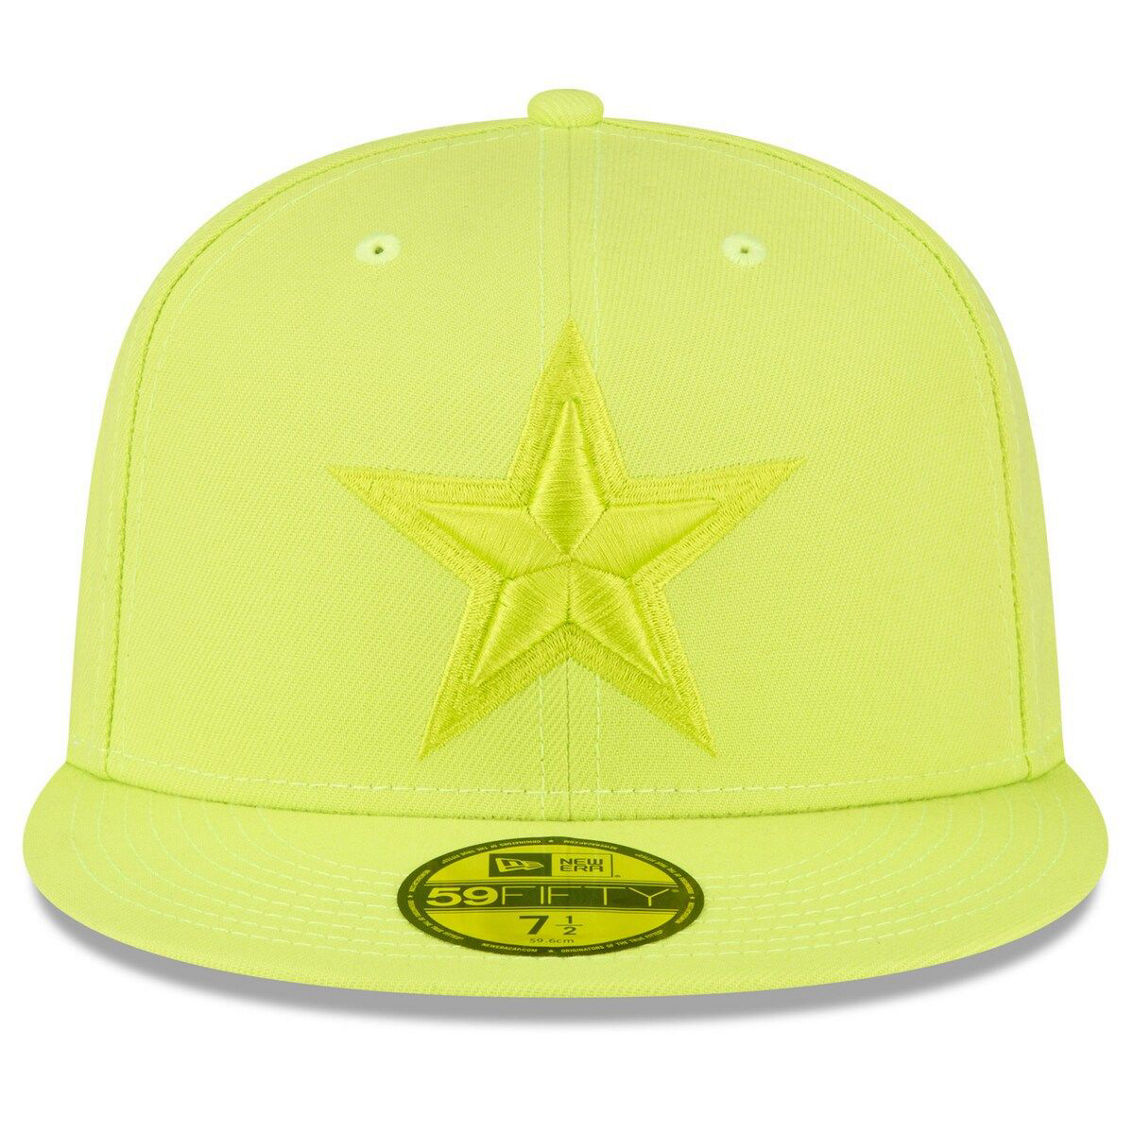 New Era Men's Neon Green Dallas Cowboys Color Pack Brights 59FIFTY Fitted Hat - Image 3 of 4